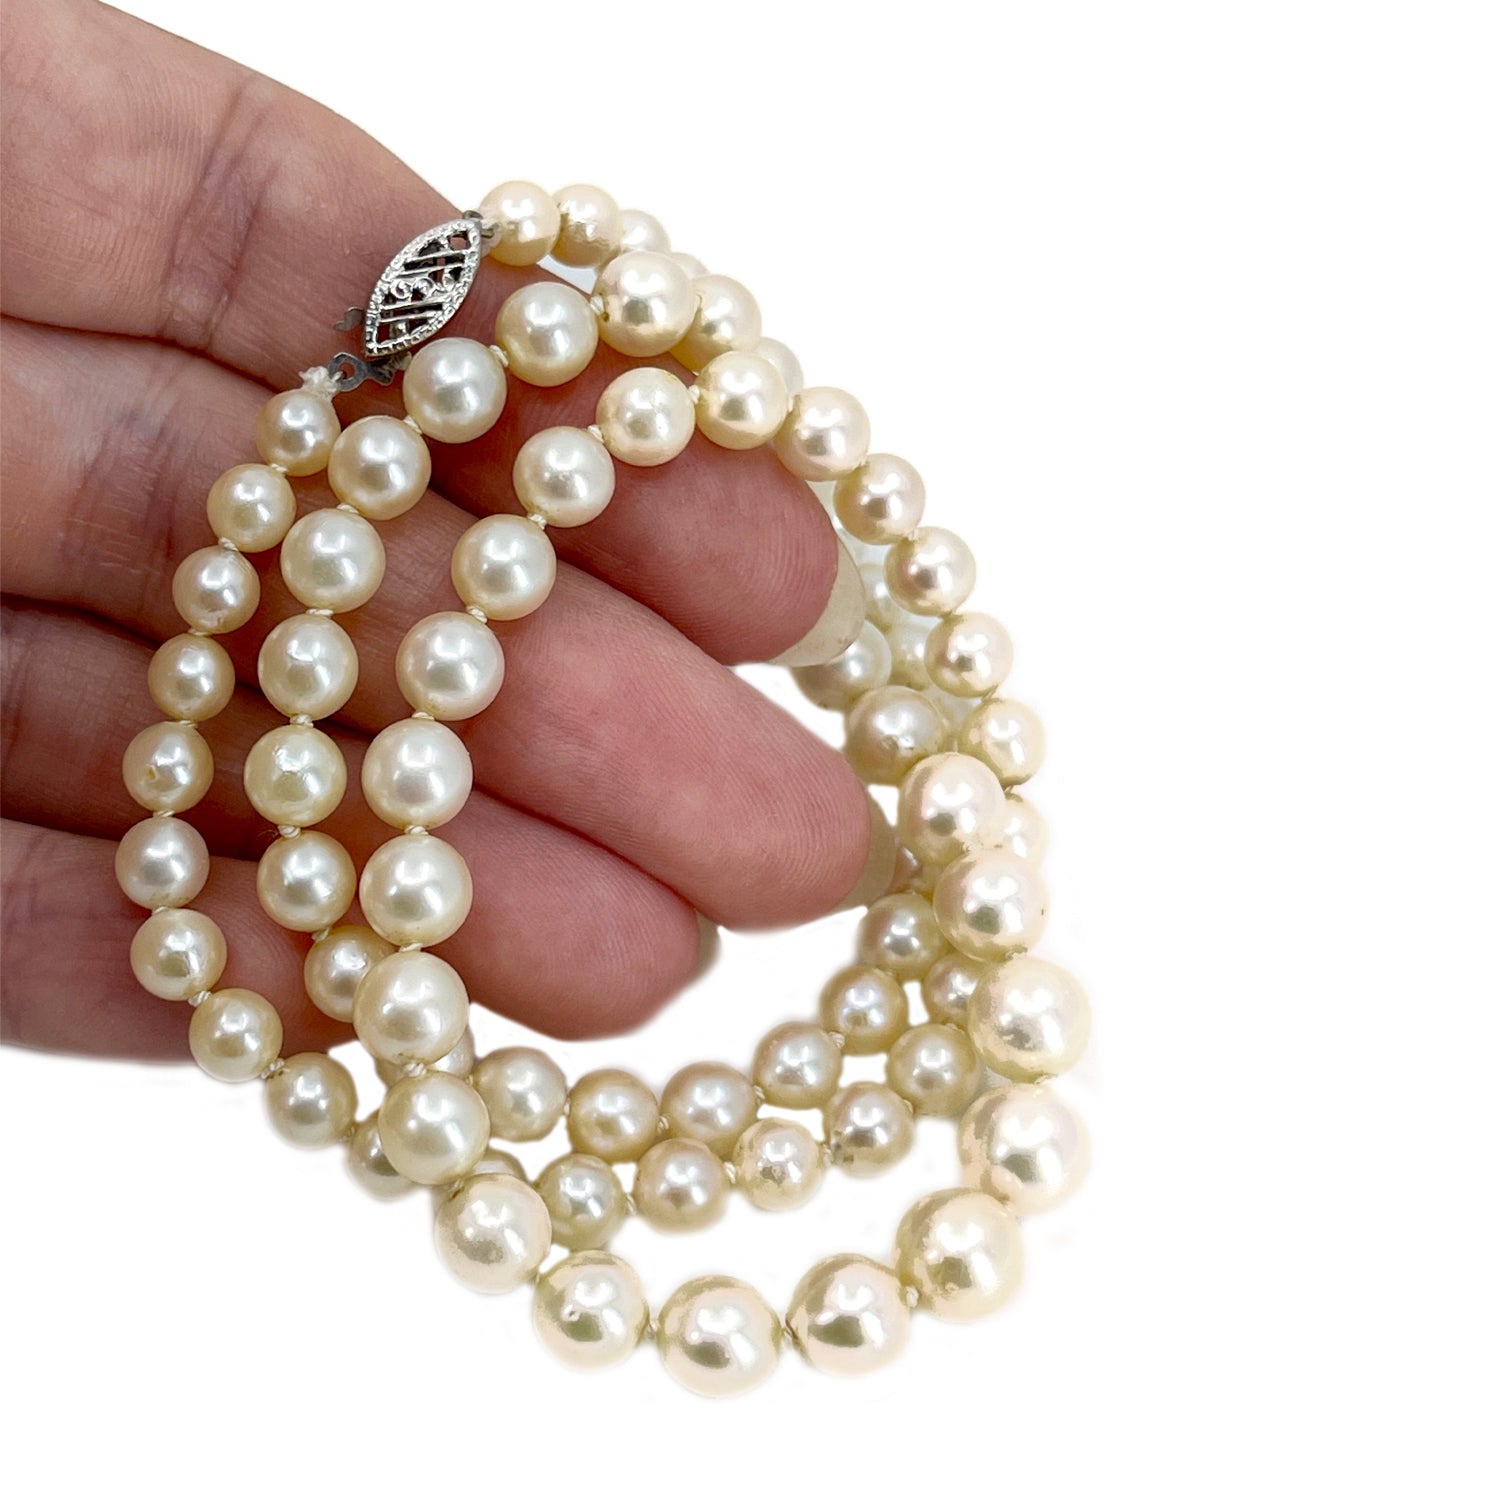 Vintage Cream Graduated Japanese Saltwater Cultured Akoya Pearl Necklace - 14K White Gold 19.75 Inch